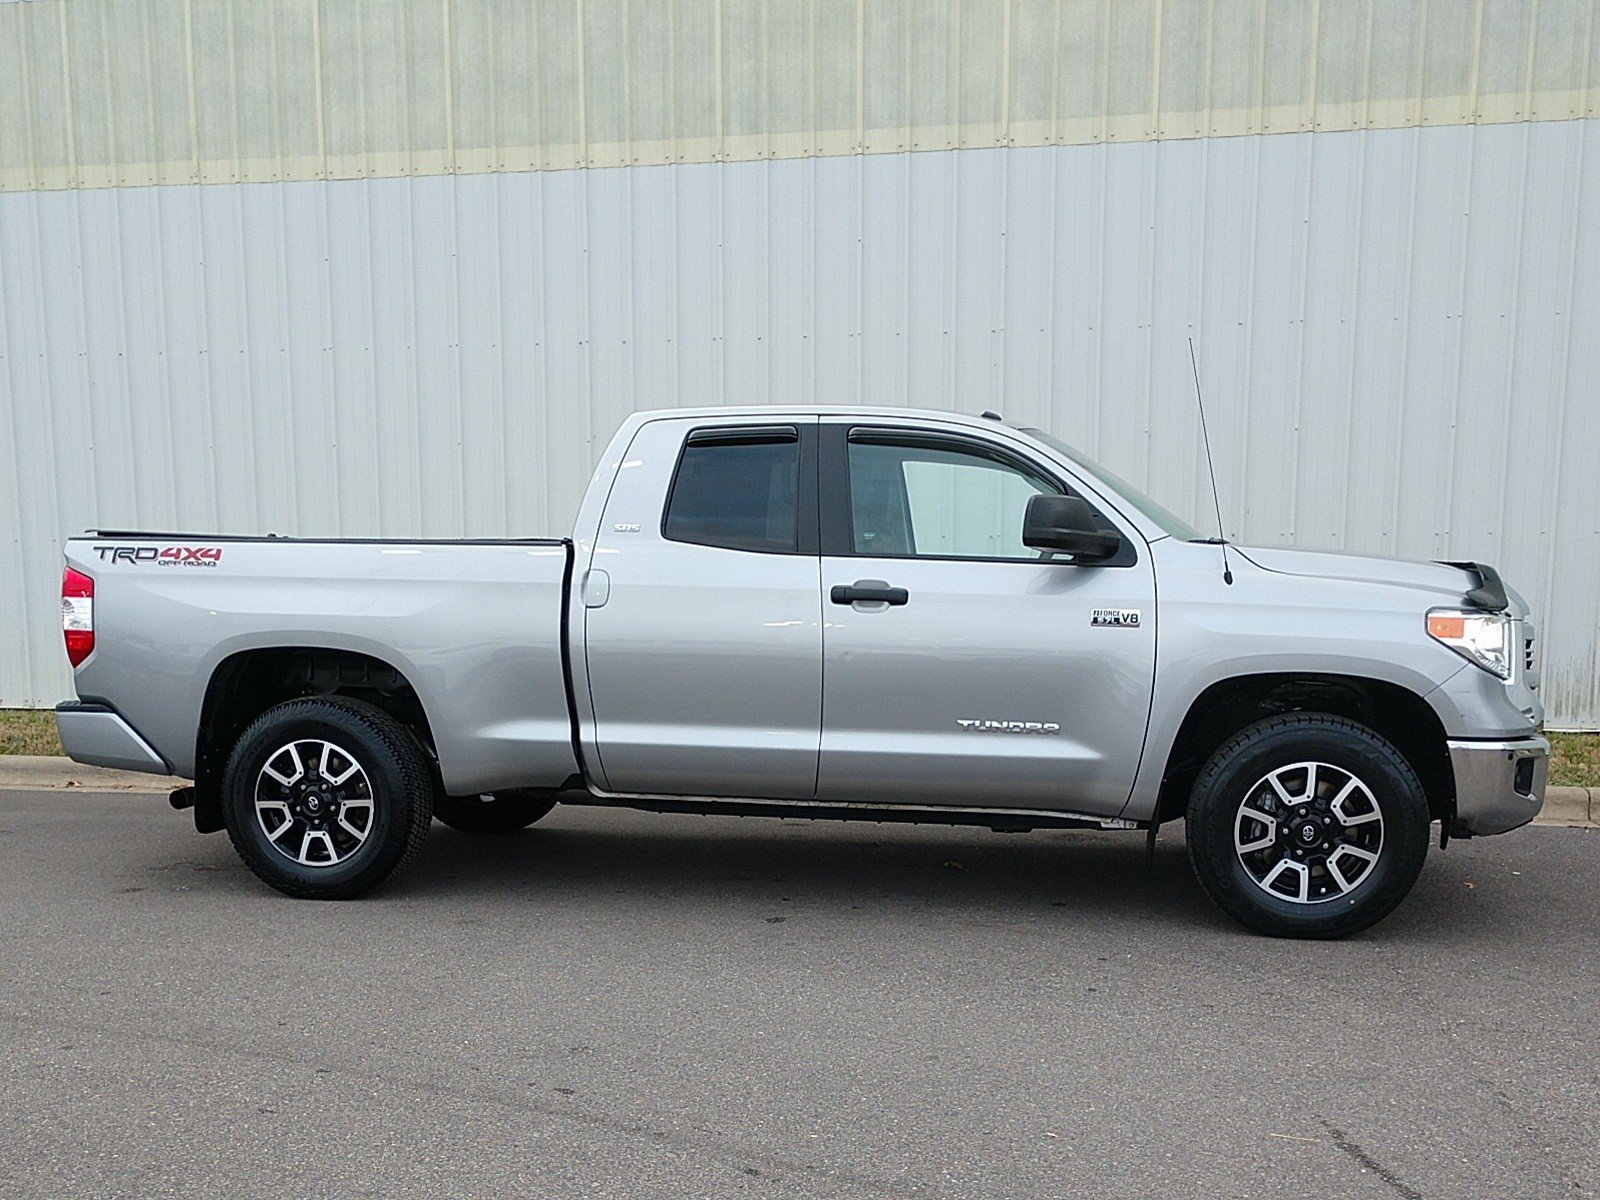 Pre-Owned 2017 Toyota Tundra Crew Cab Pickup in Birmingham #743391A